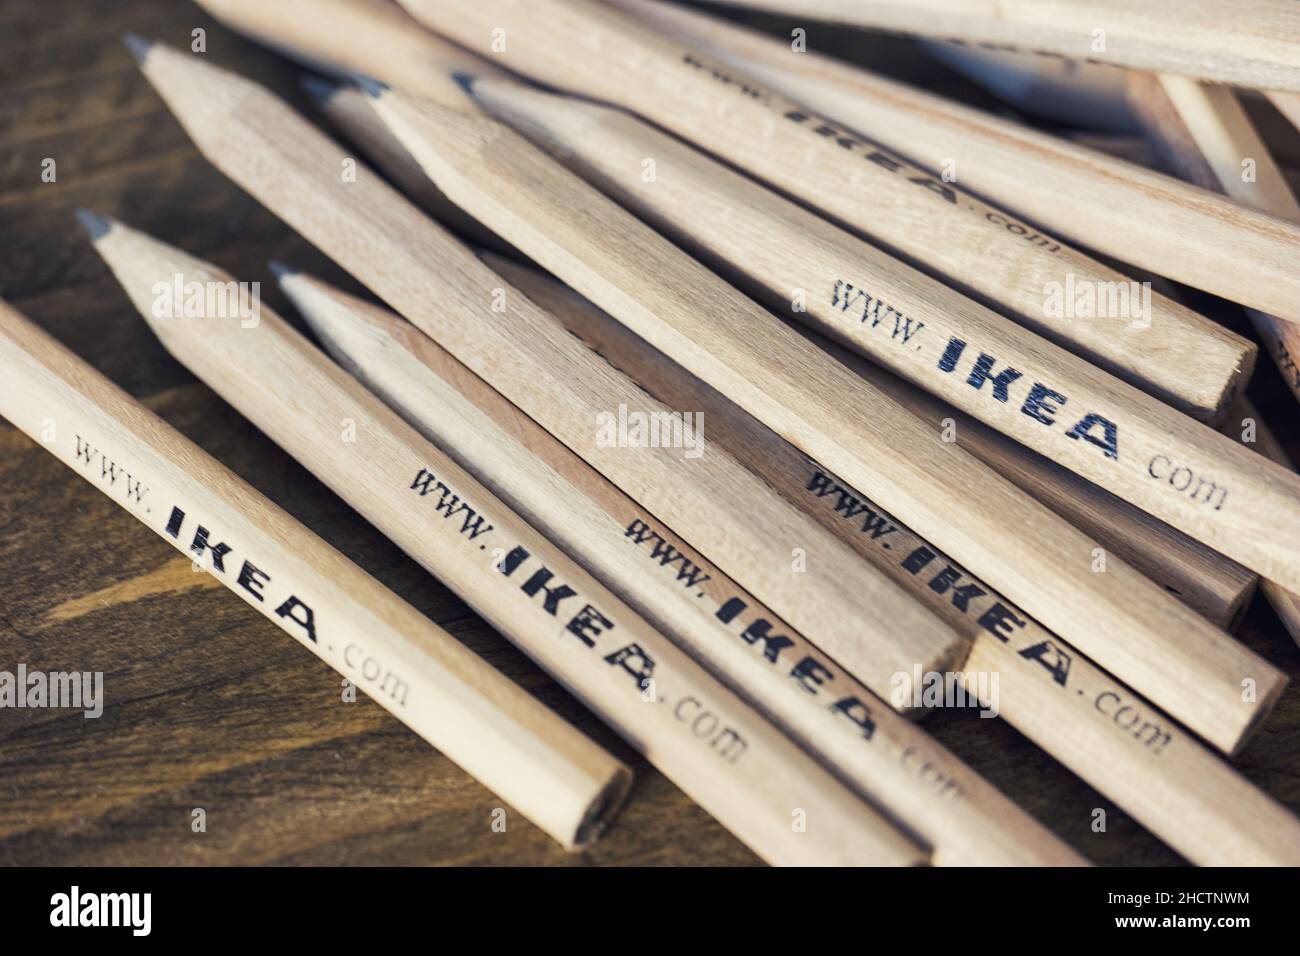 IKEA pencils placed ona wooden table . IKEA Founded in Sweden in 1943, Ikea  is the world's largest furniture retailer Stock Photo - Alamy